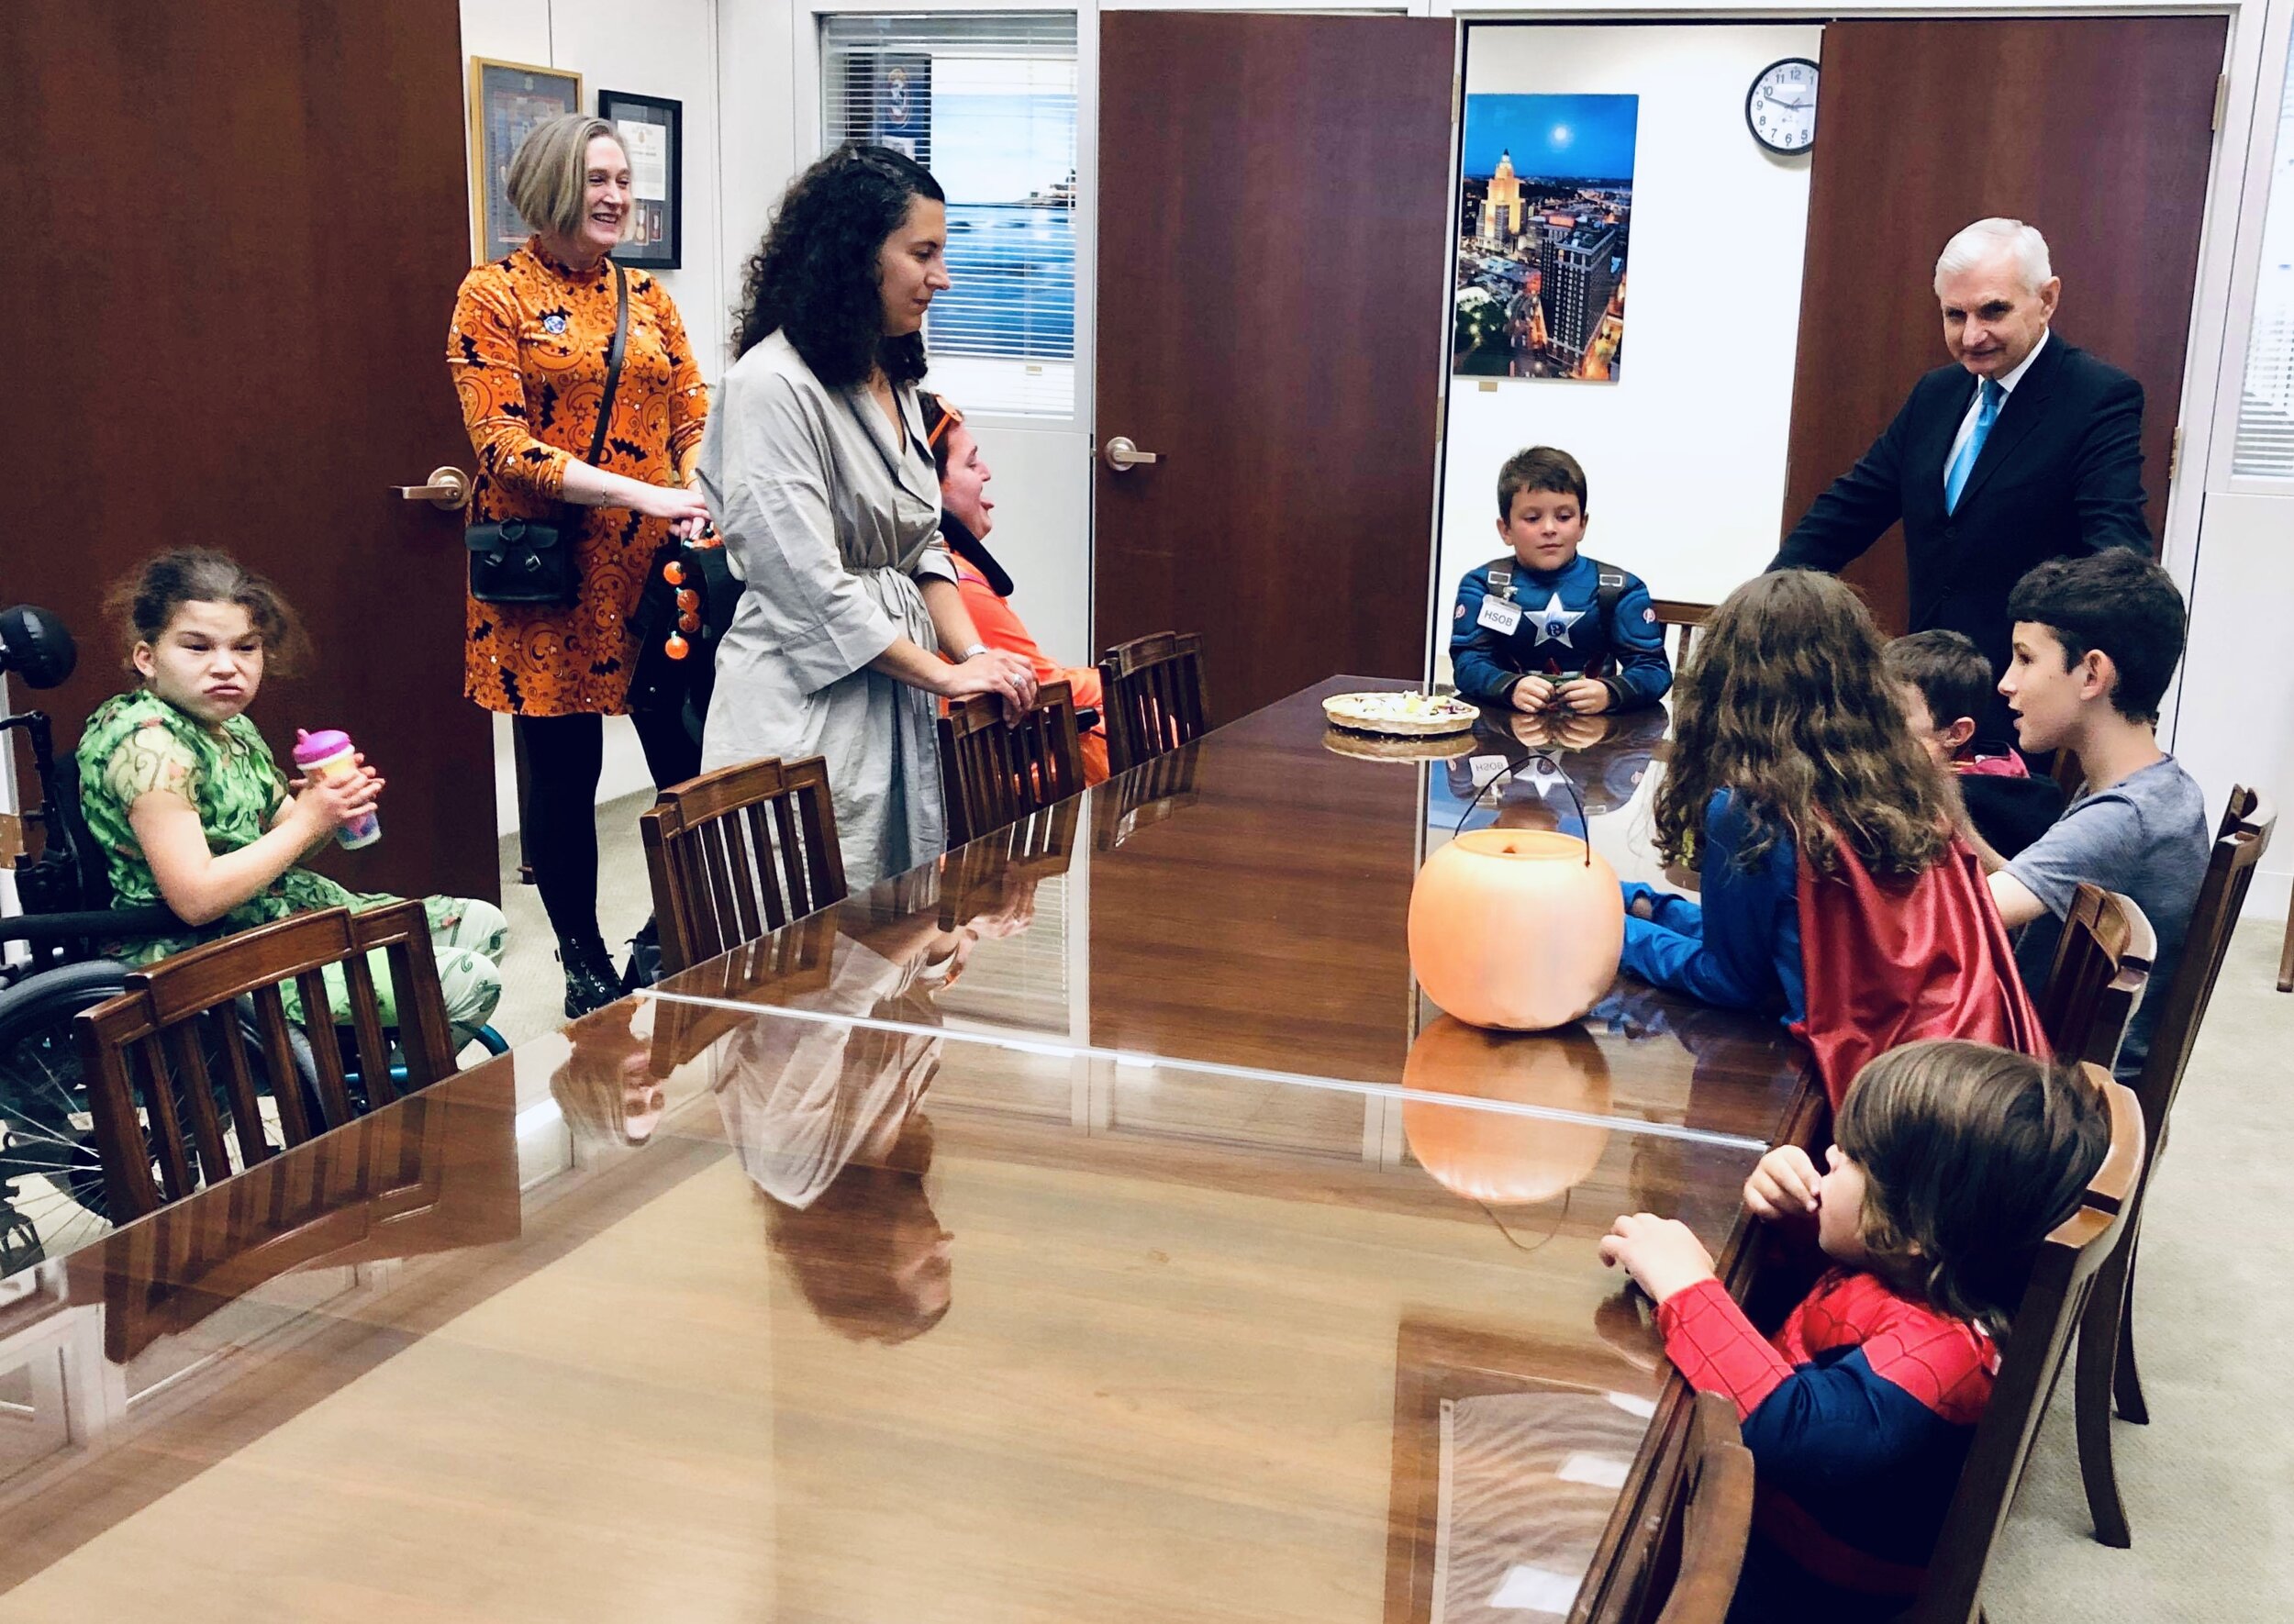  Little Lobbyists families sit around a table in a congressional office while telling their health care stories to a congressman. 